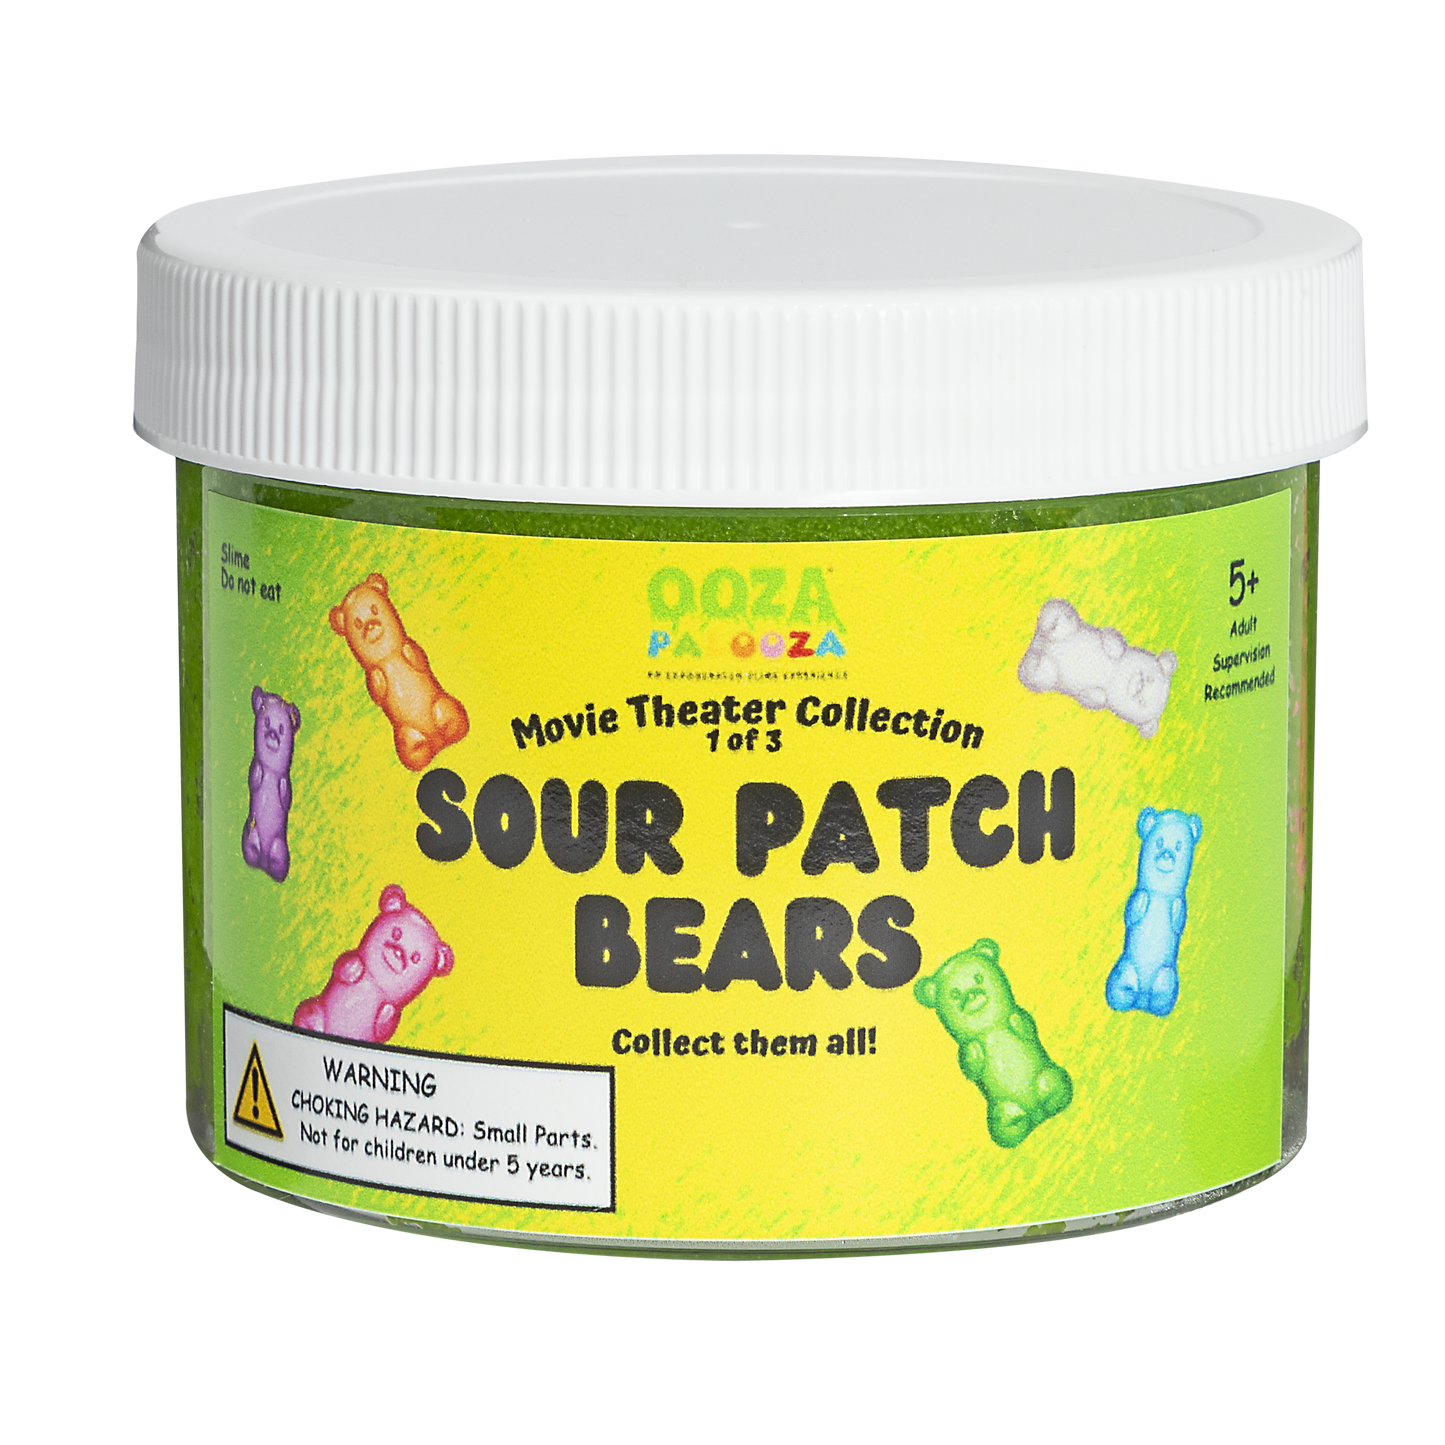 Sour Patch Bears Slime